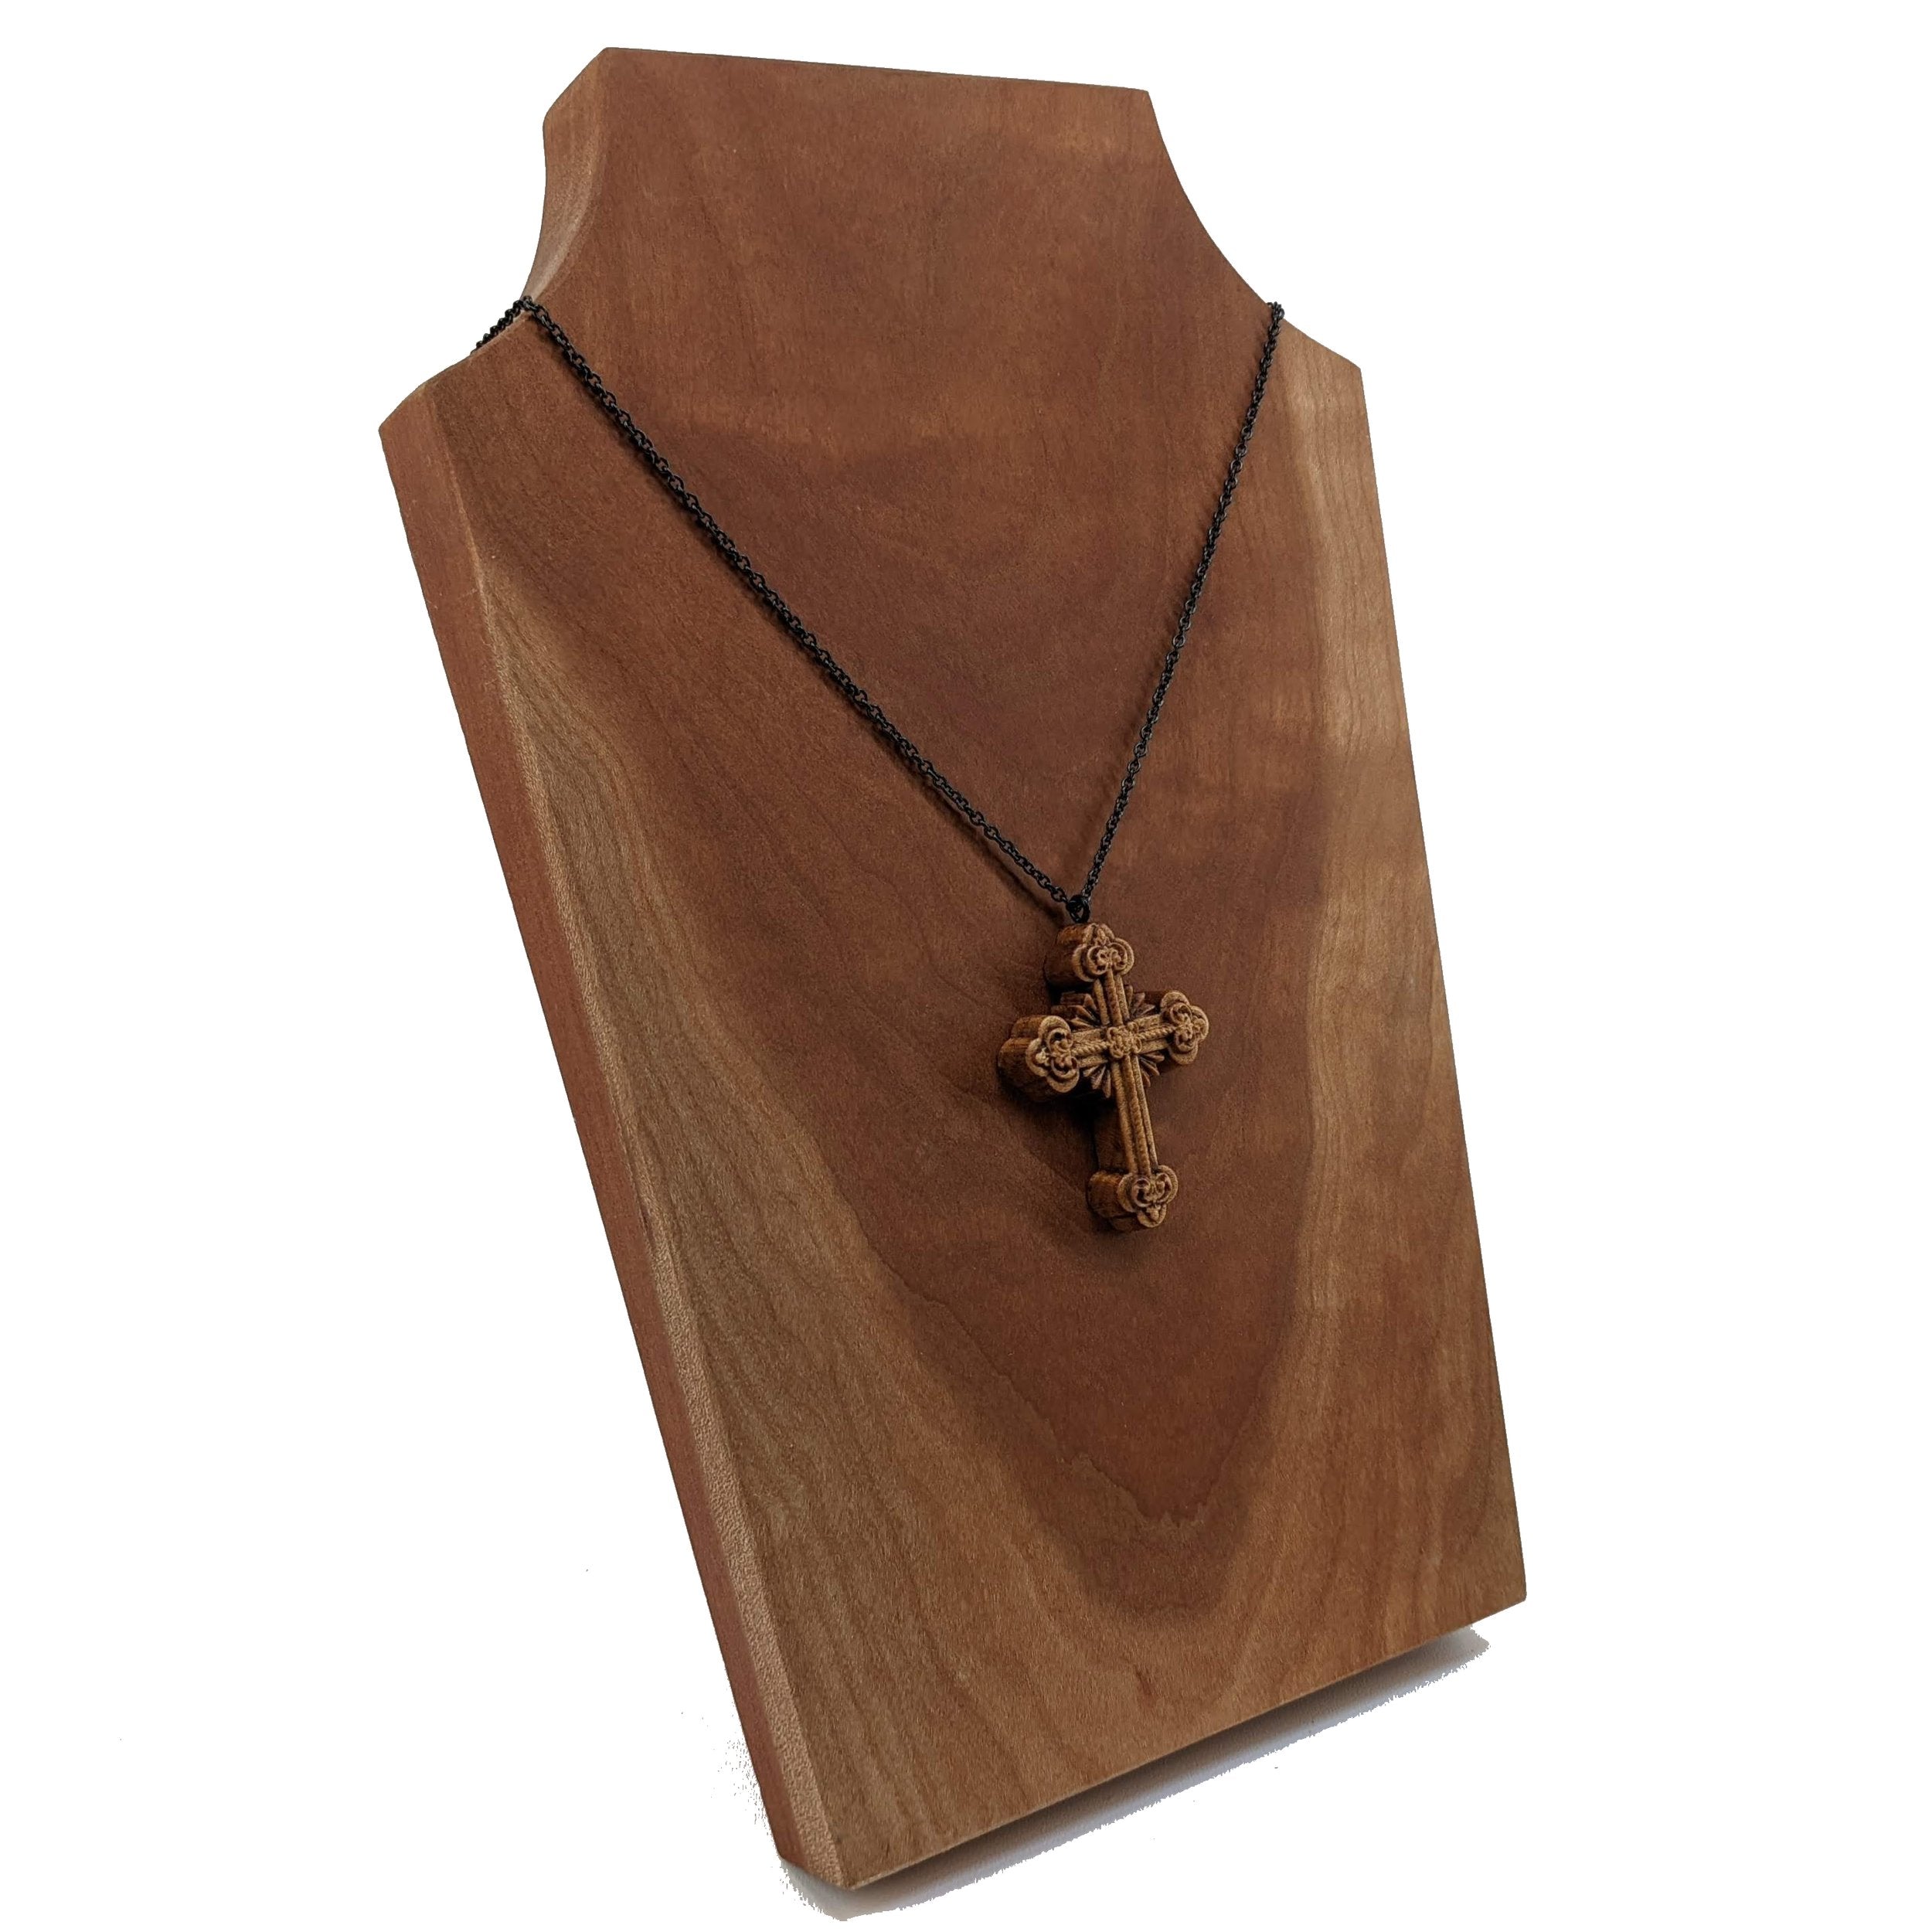 M & F Western Men's Twister Antique Cross Necklace - Country Outfitter